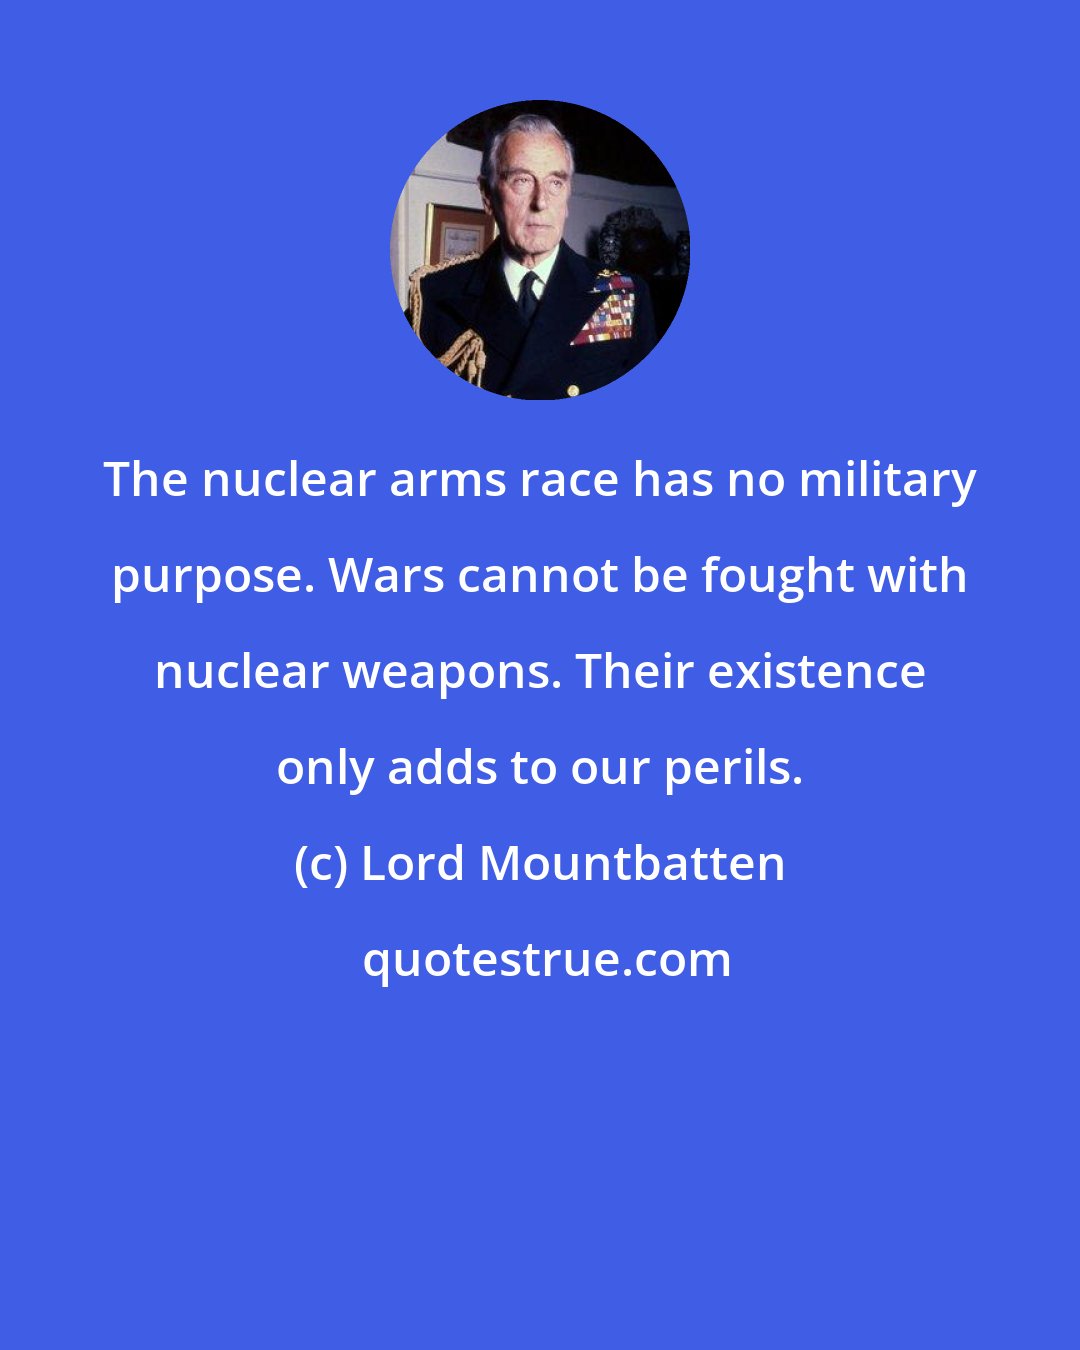 Lord Mountbatten: The nuclear arms race has no military purpose. Wars cannot be fought with nuclear weapons. Their existence only adds to our perils.